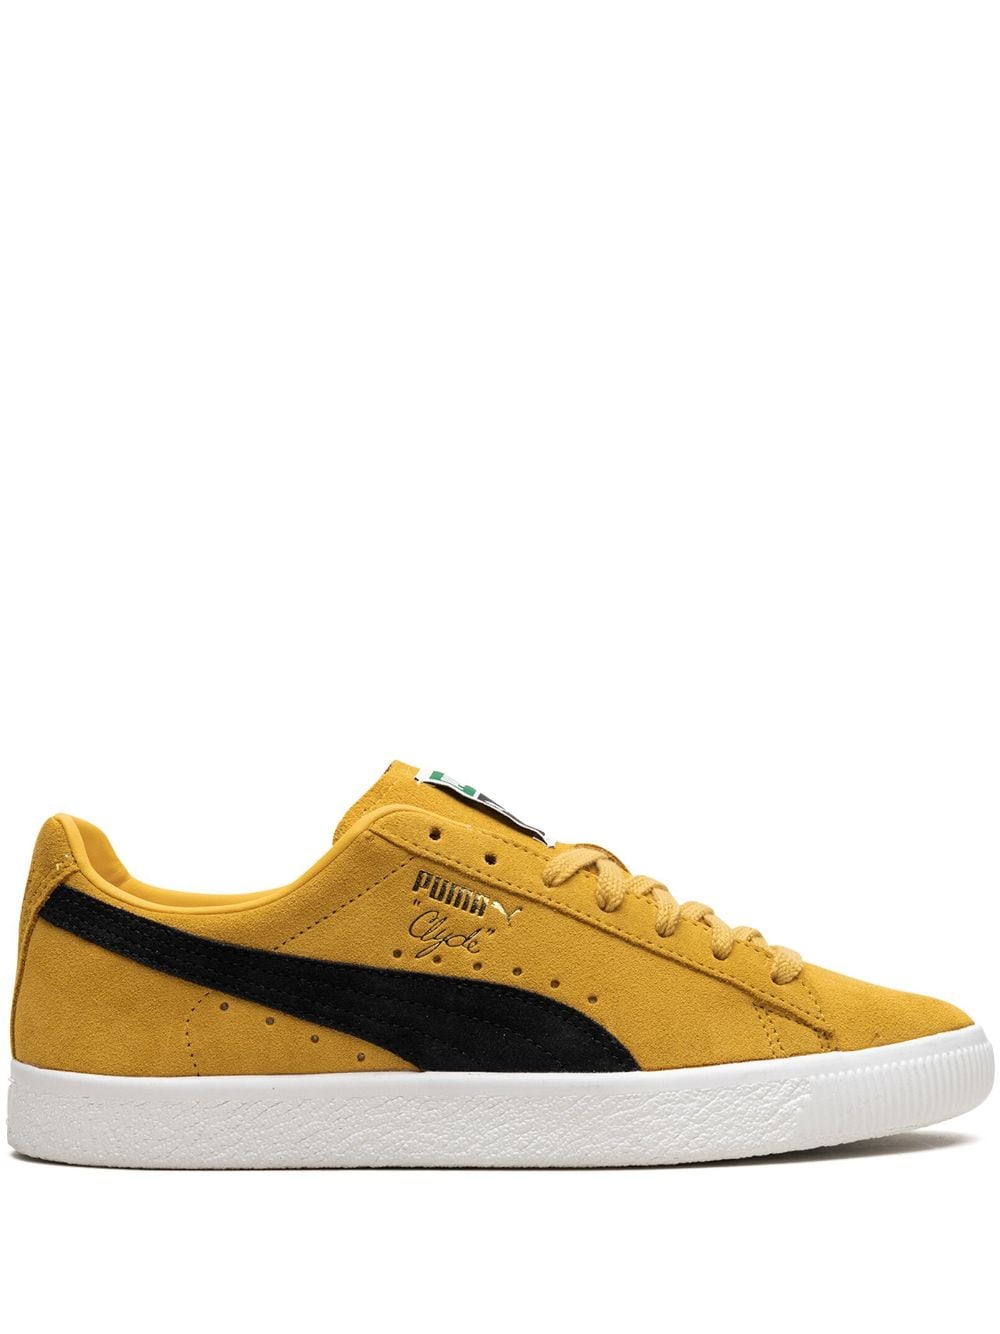 Image 1 of PUMA Clyde OG sneakers